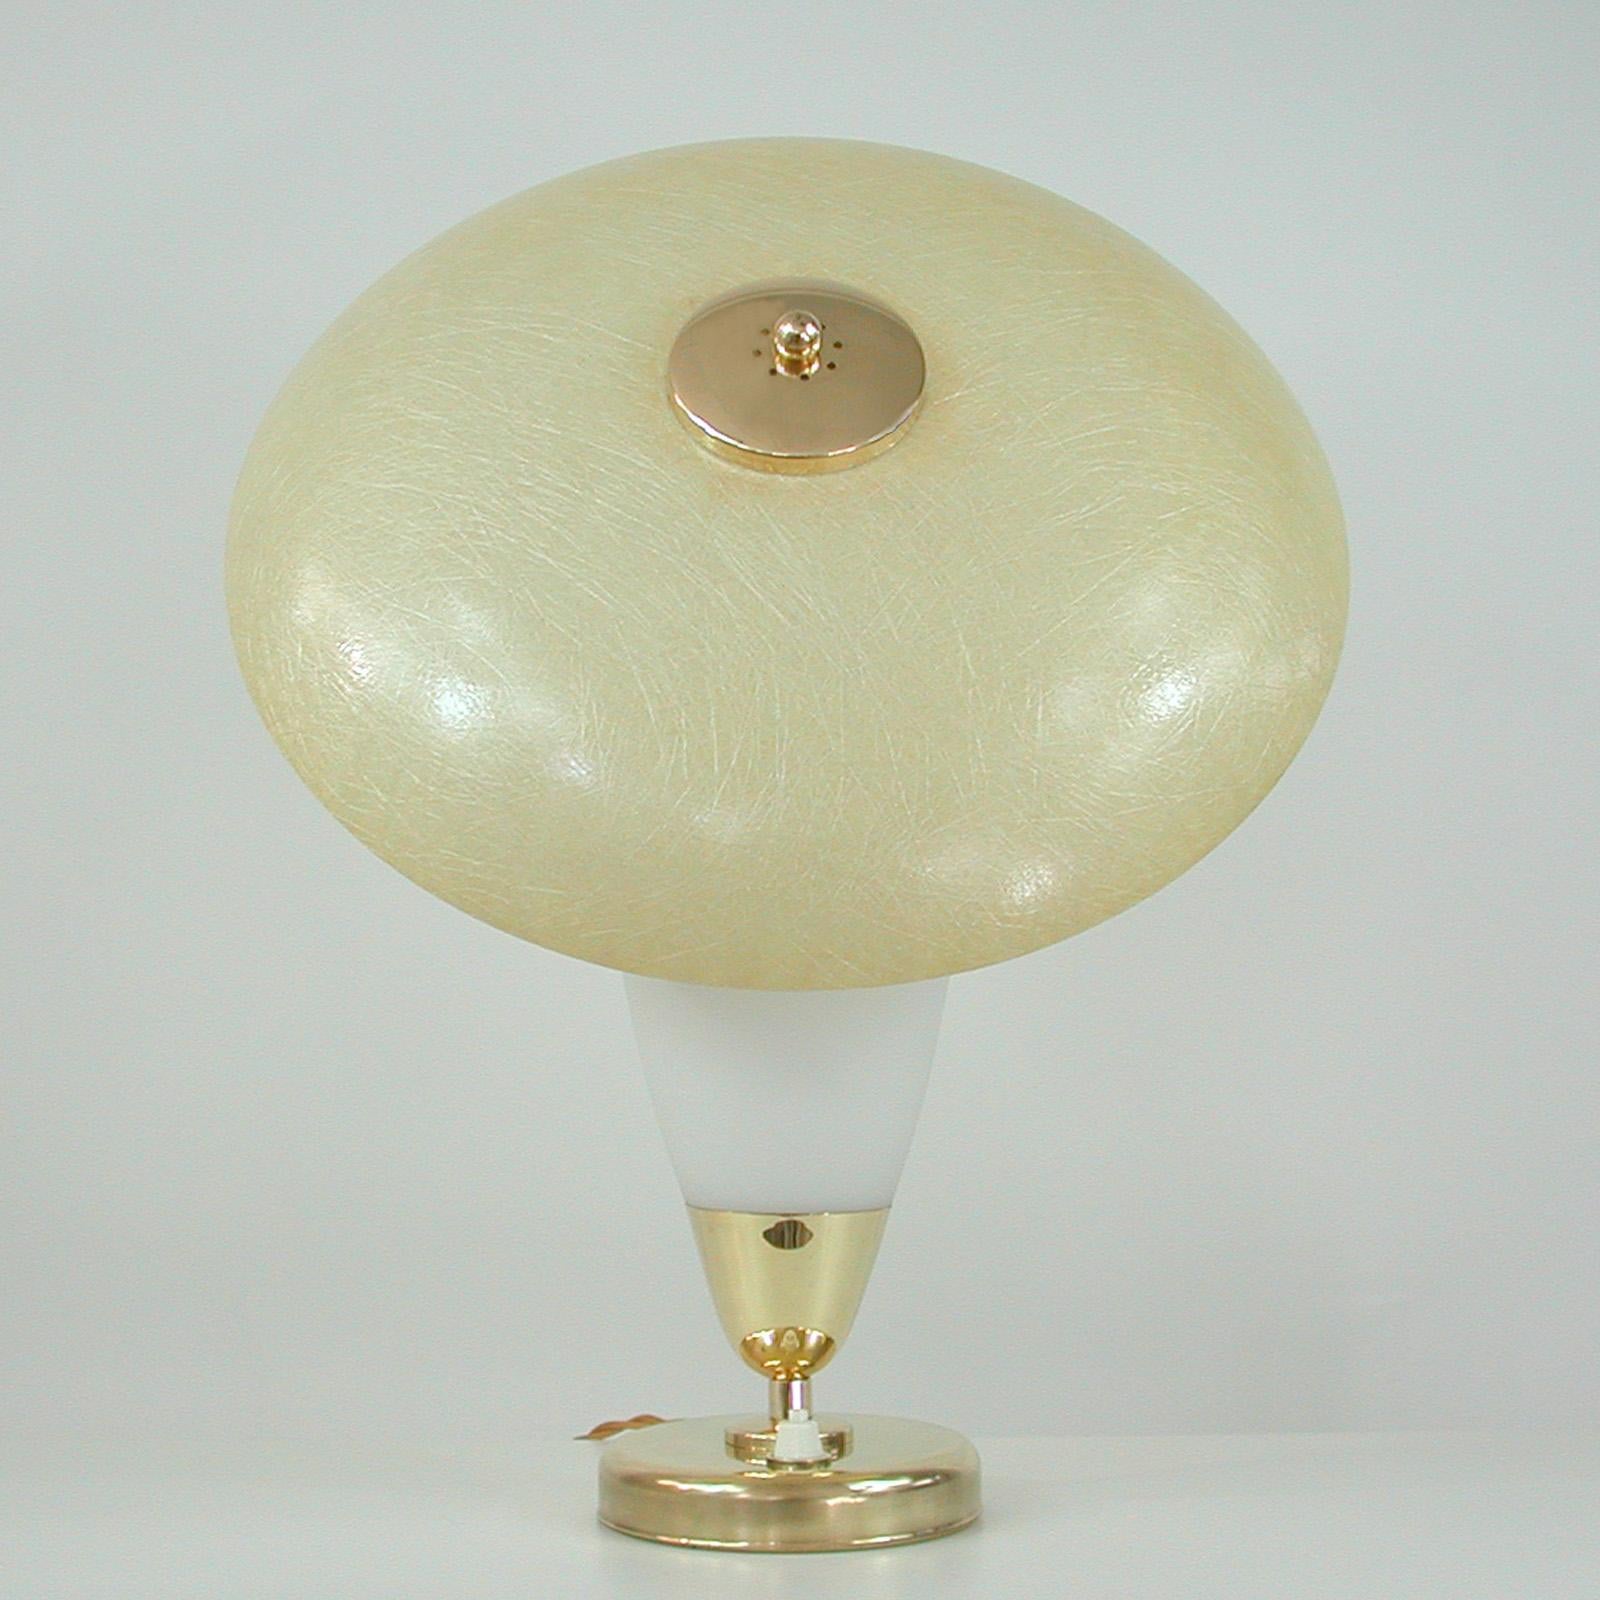 This unusual midcentury table lamp was designed and manufactured in Sweden in the 1950s to 1960s. 

This is a very stylish and dynamic atomic piece in the style of Greta Grossmans reflector designs of the 1950s.

The lamp features a brass base,